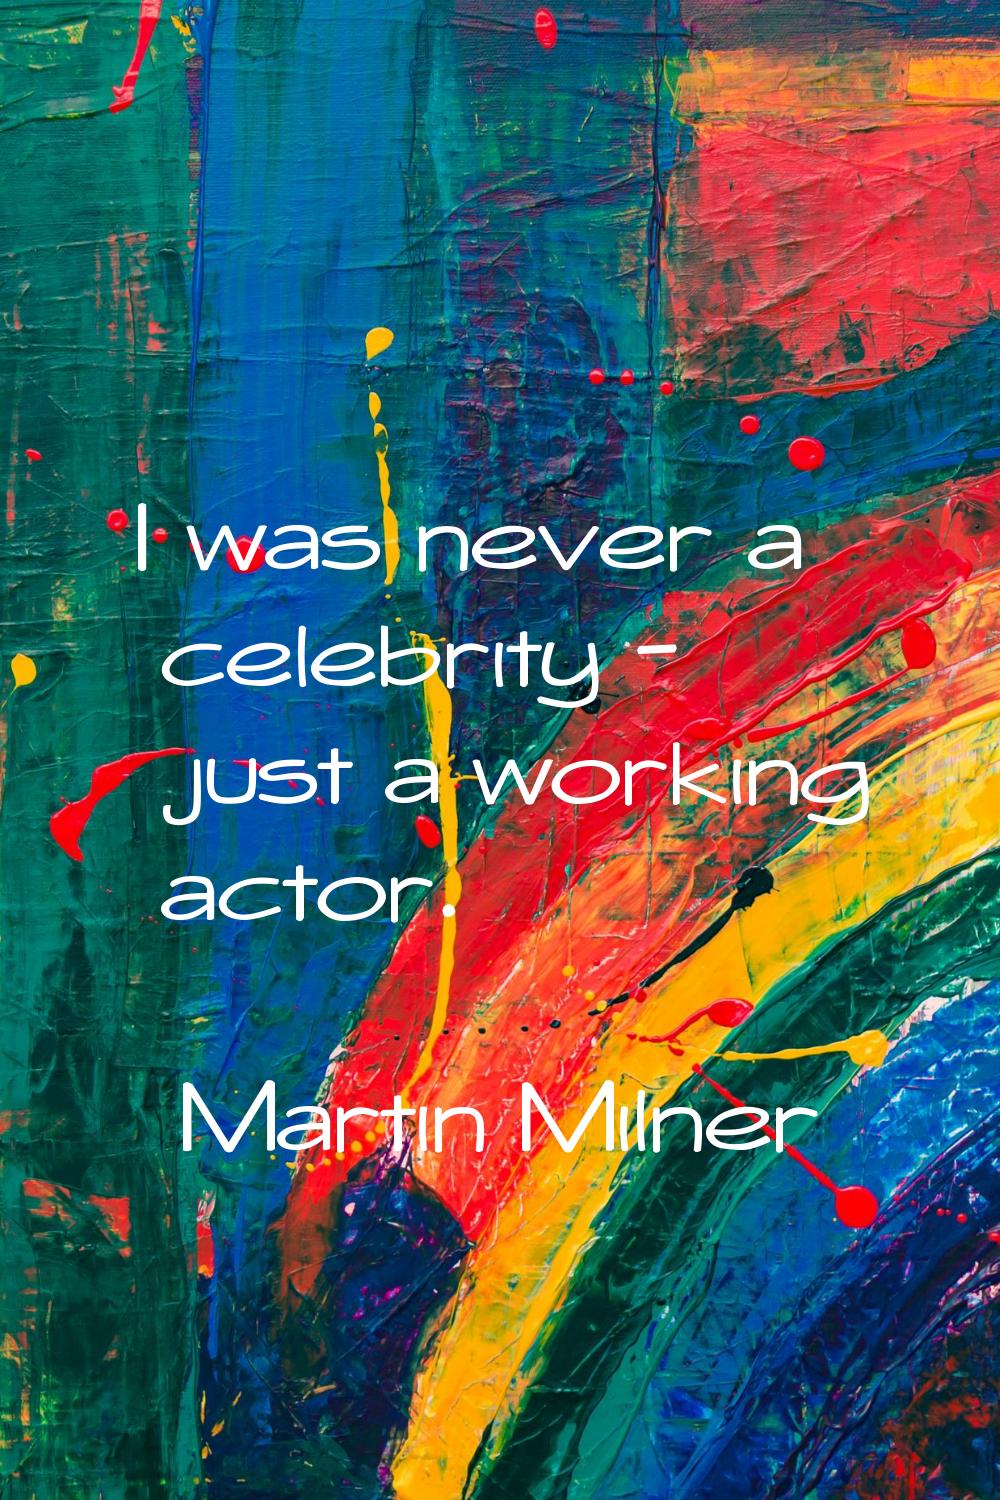 I was never a celebrity - just a working actor.